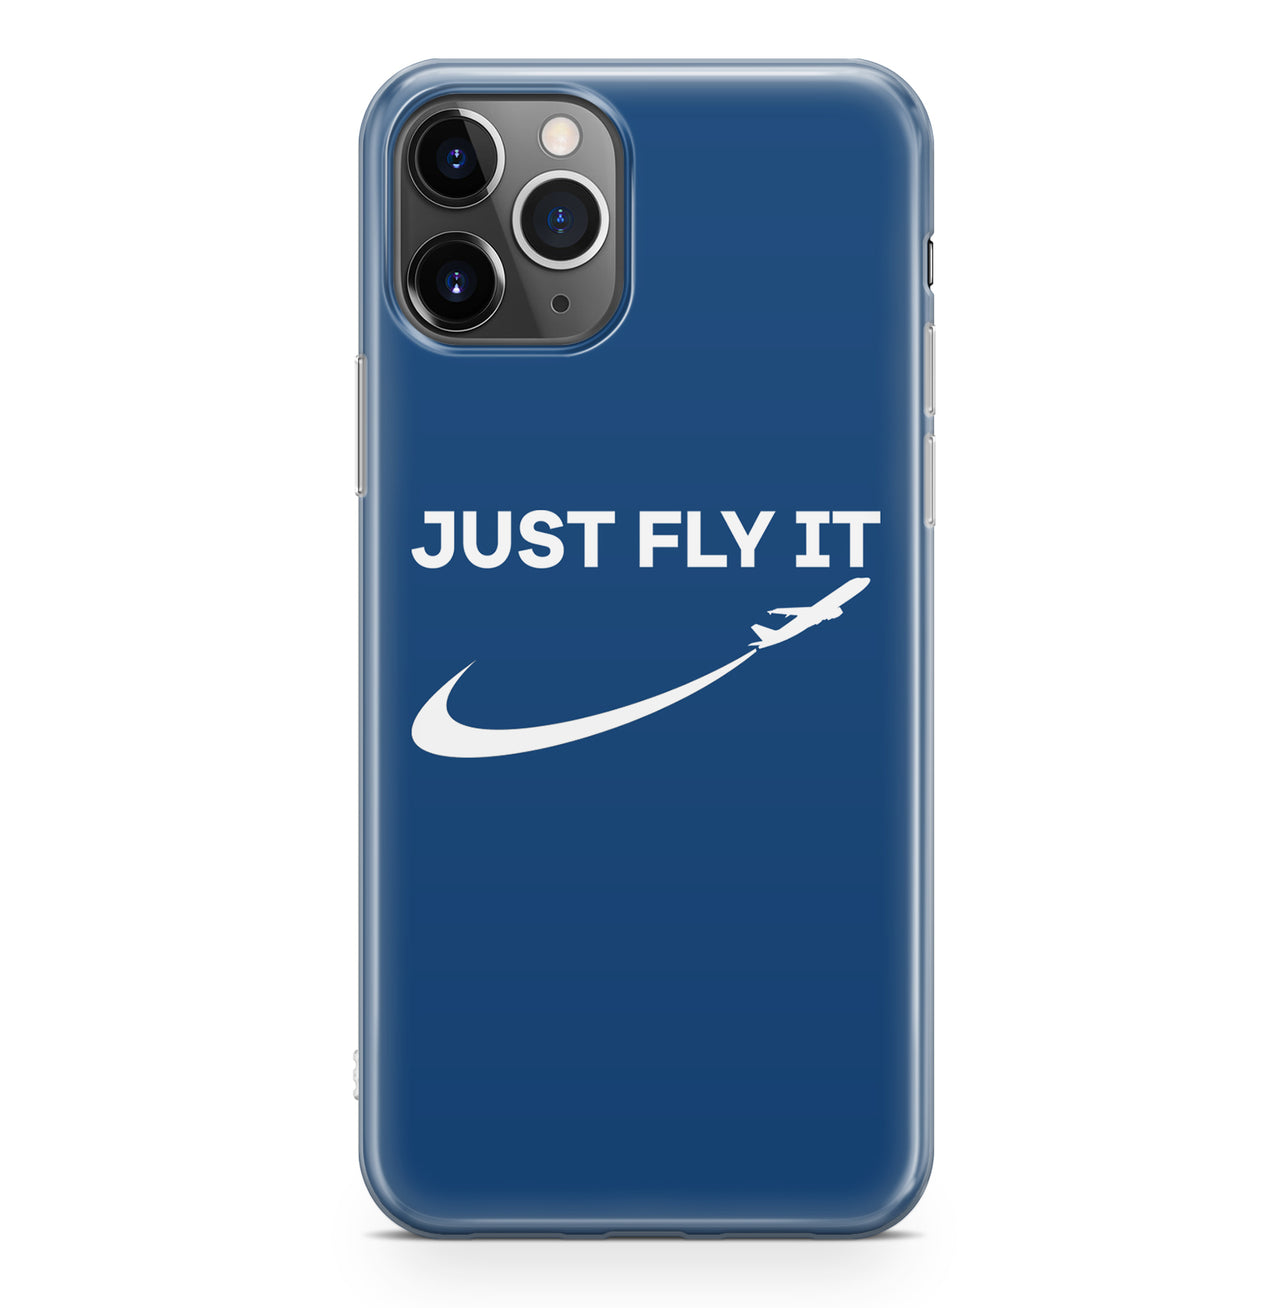 Just Fly It 2 Designed iPhone Cases